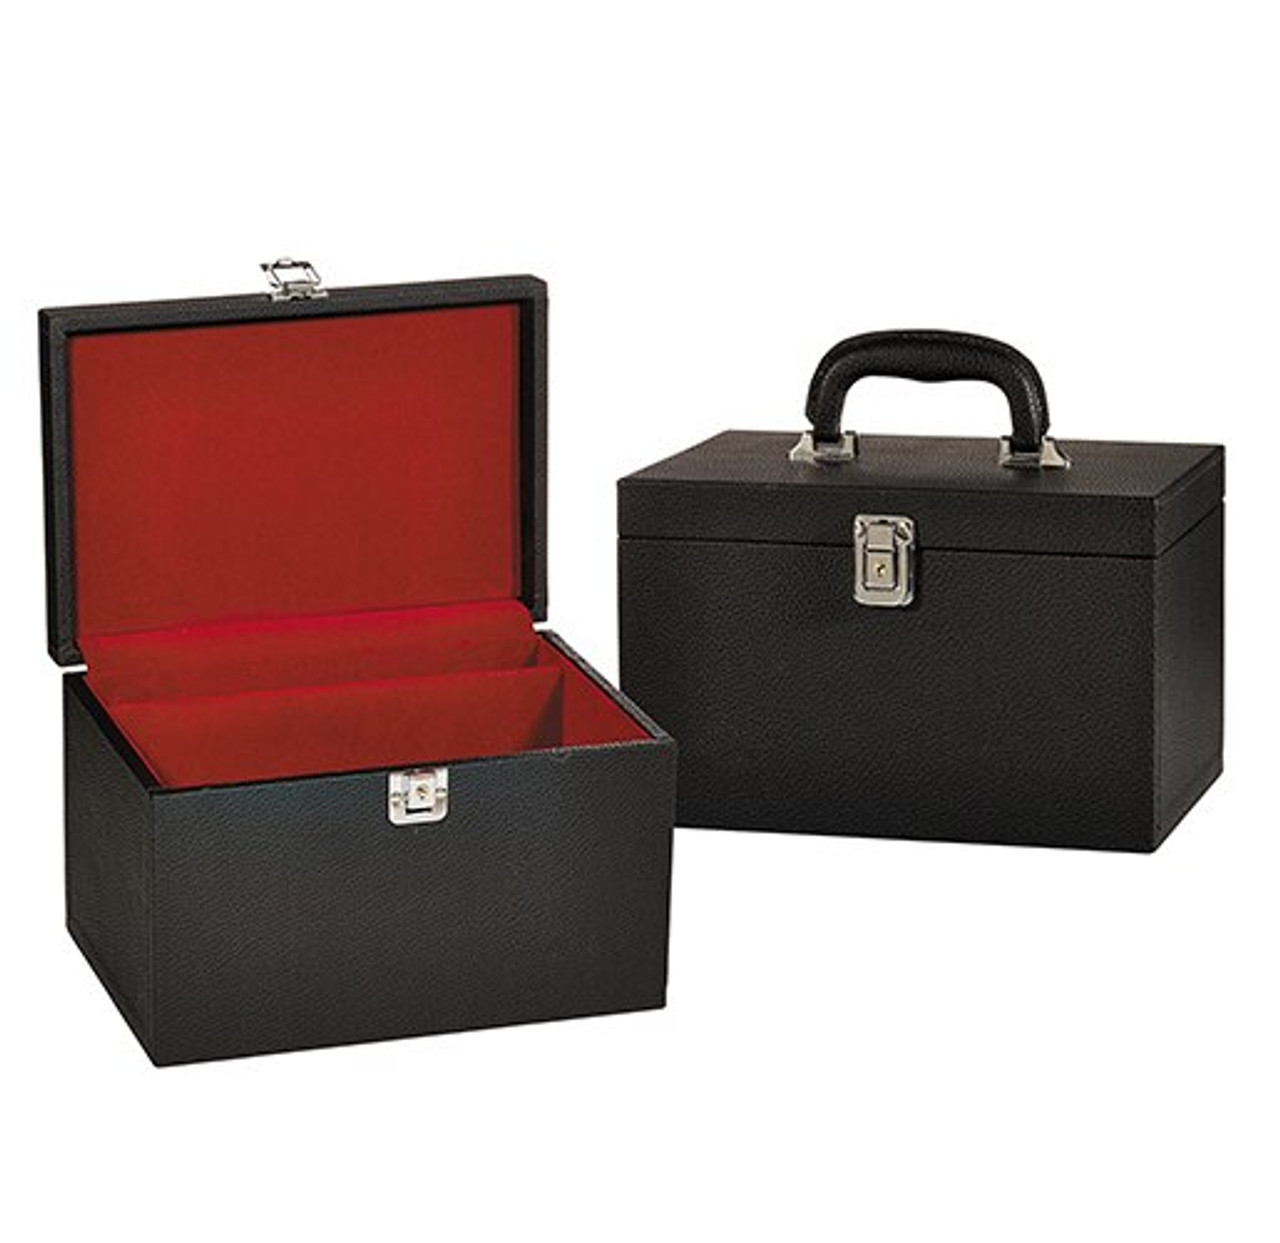 Paten Carrying Case Real Leather Red 9x9 Cross - 0.1 kg